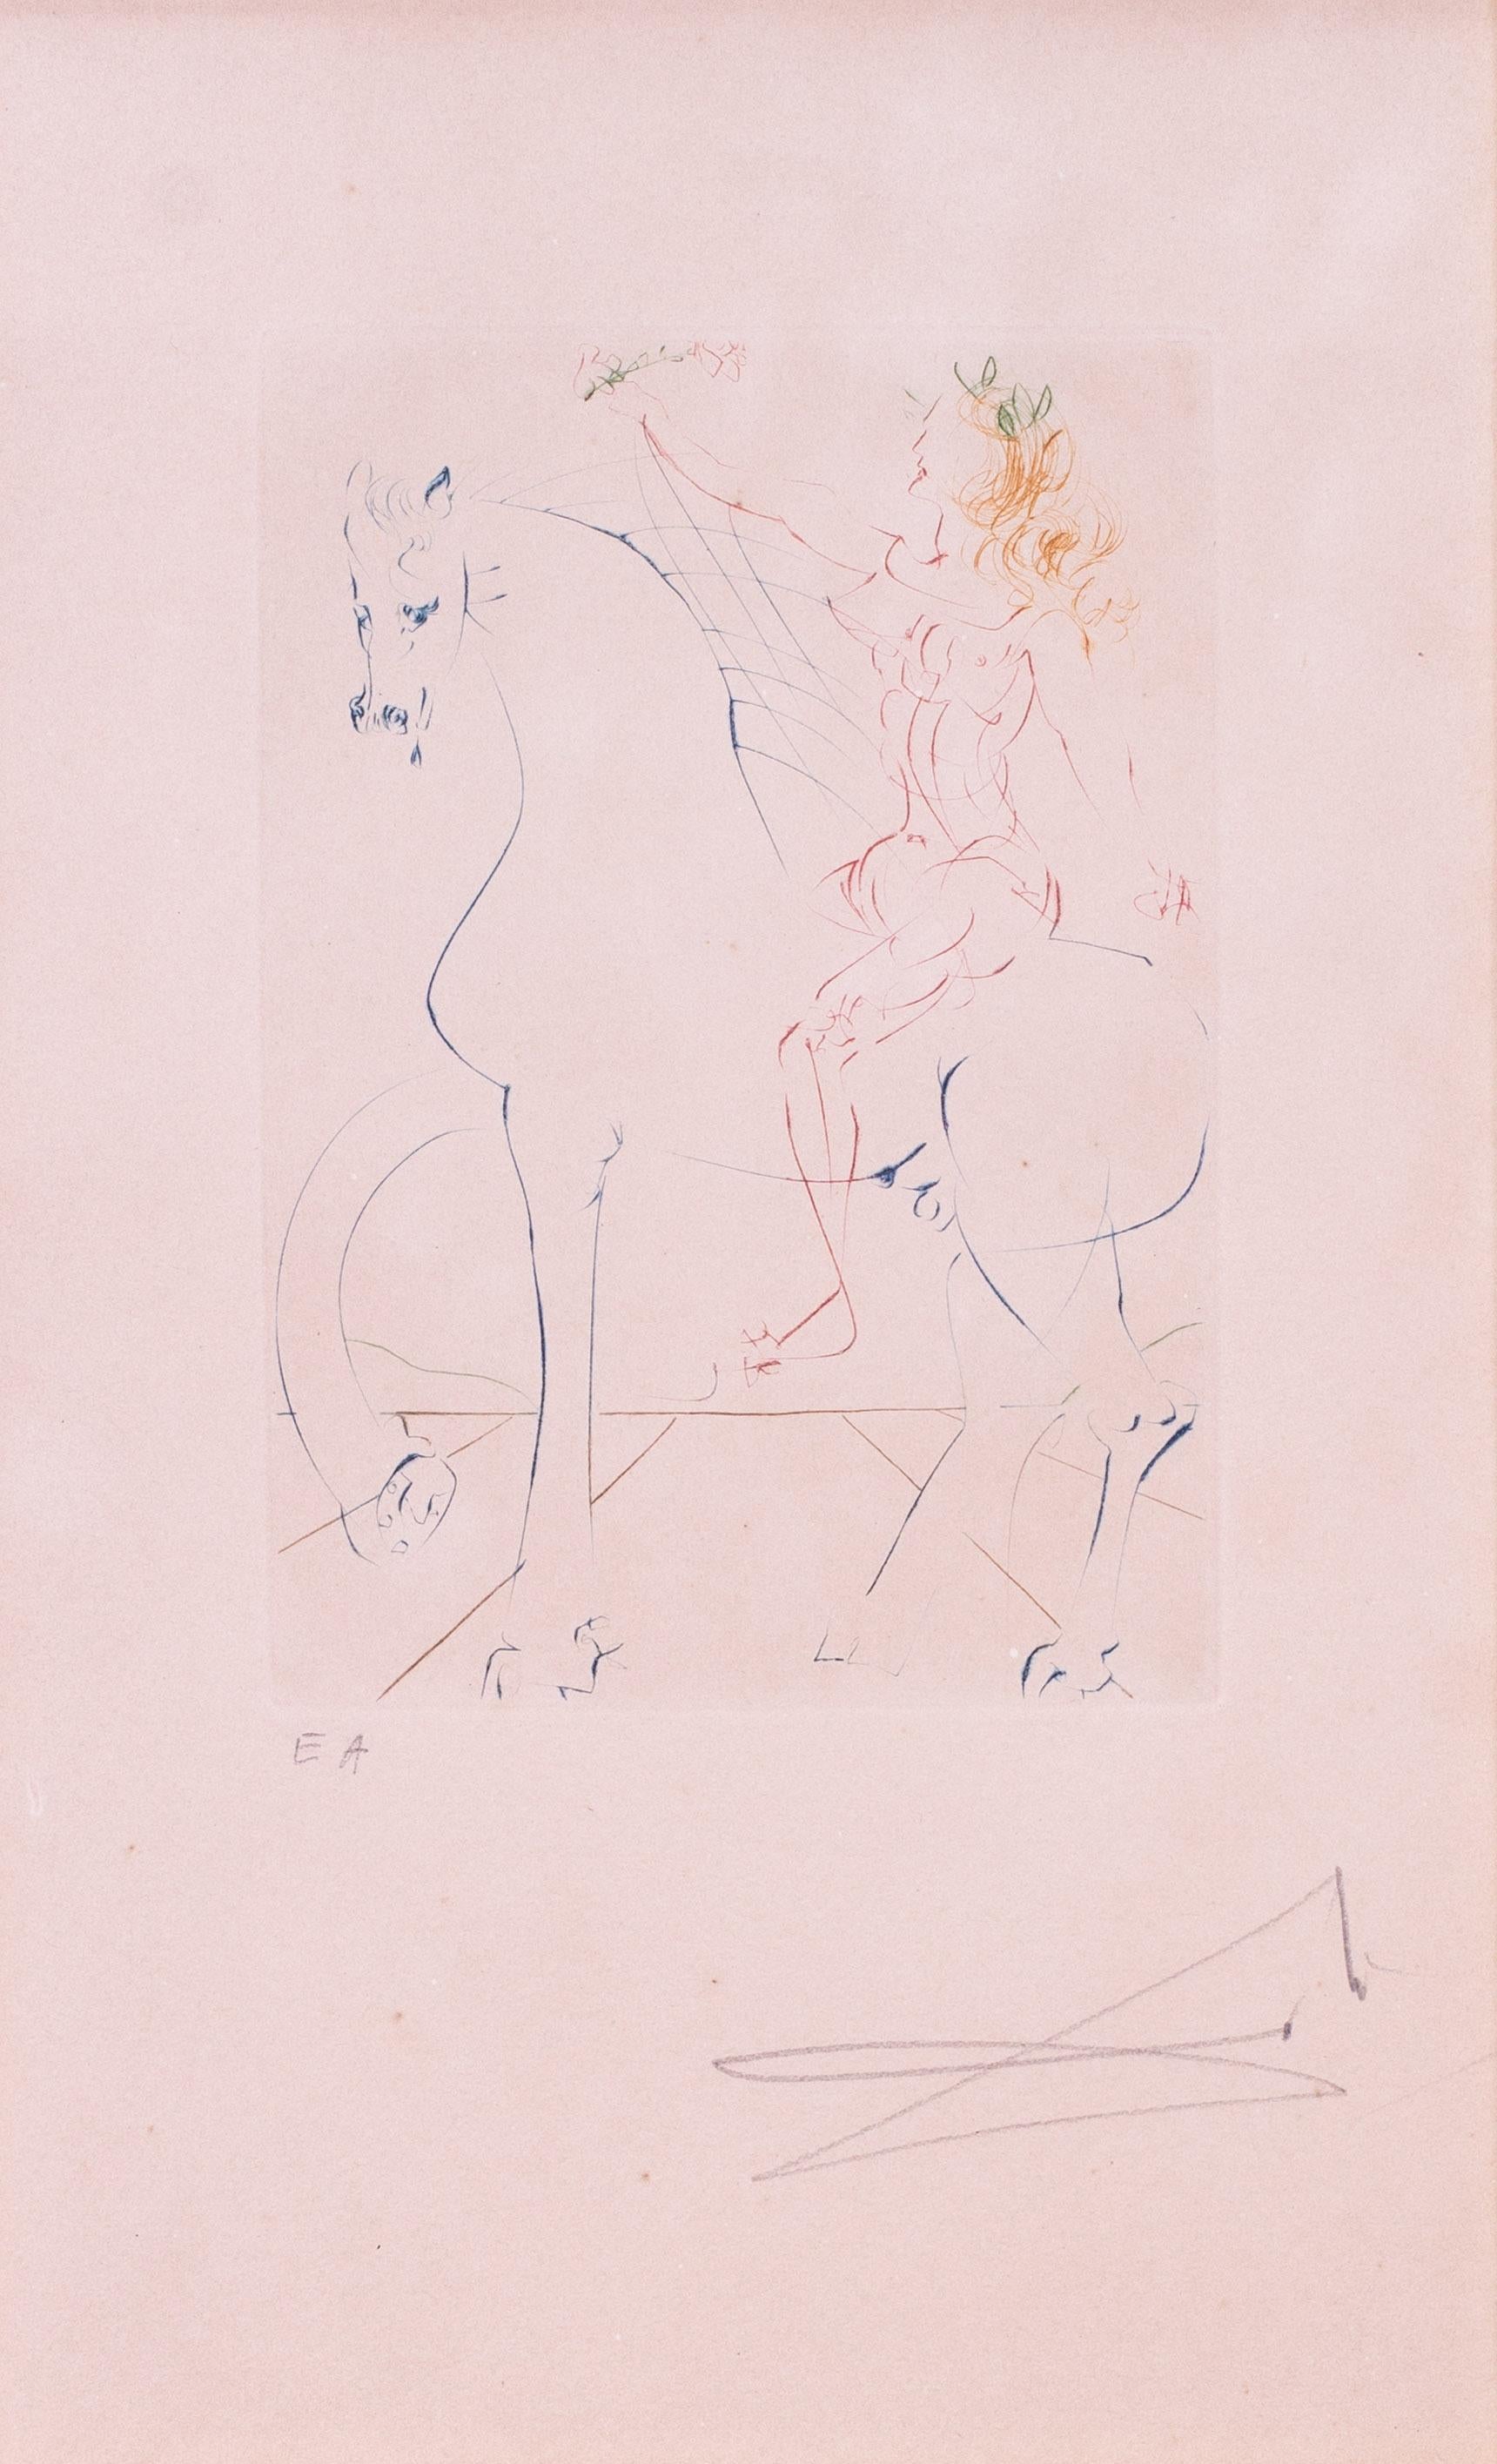 Salvador Dali signed drypoint etching 'Triumph' from Women and Horses, 1973 - Print by Salvador Dalí